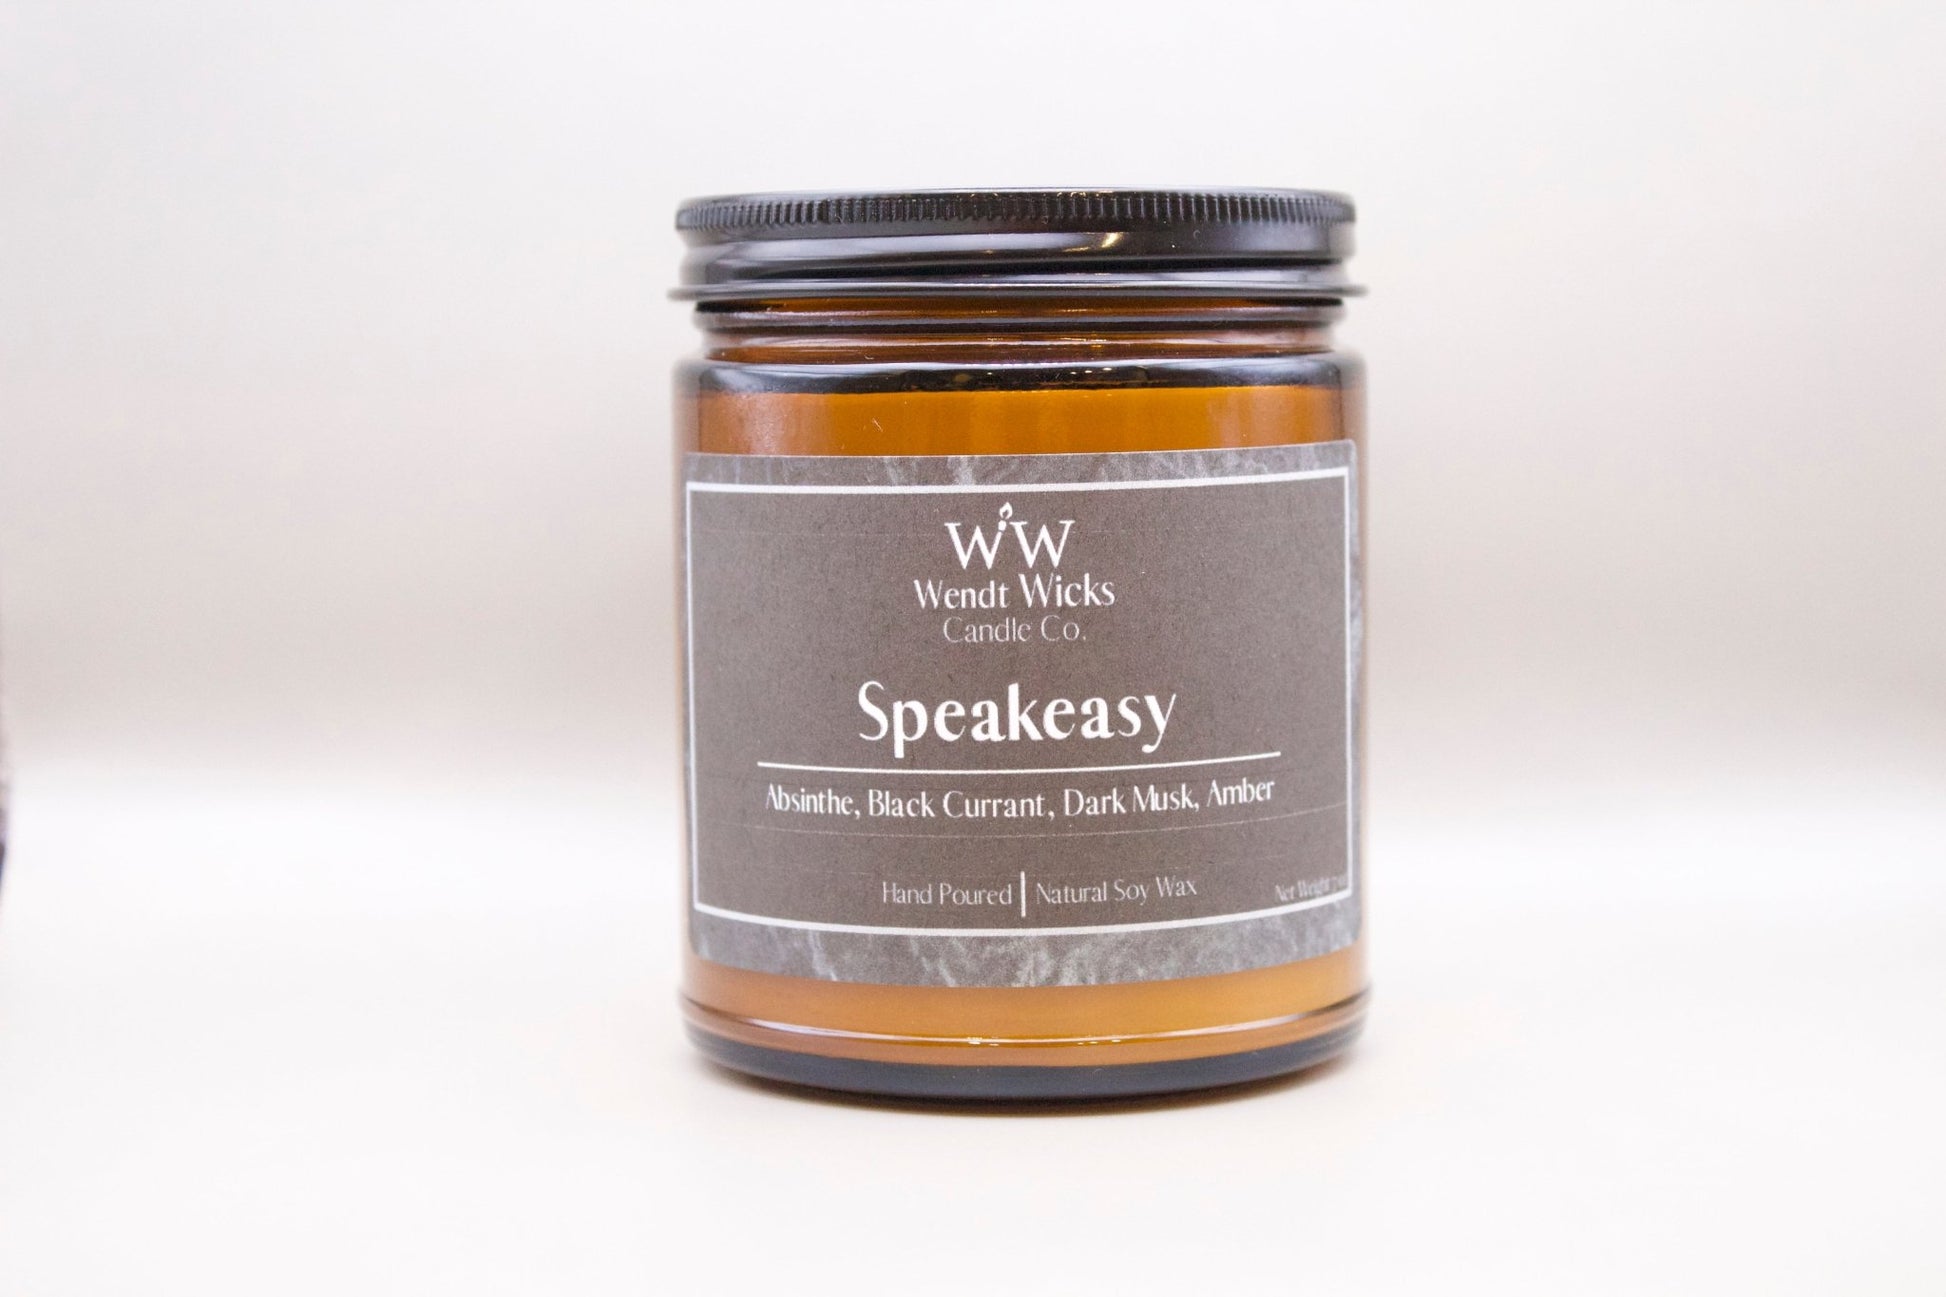 Speakeasy - Wendt Wicks Candle Co. - Amber candle